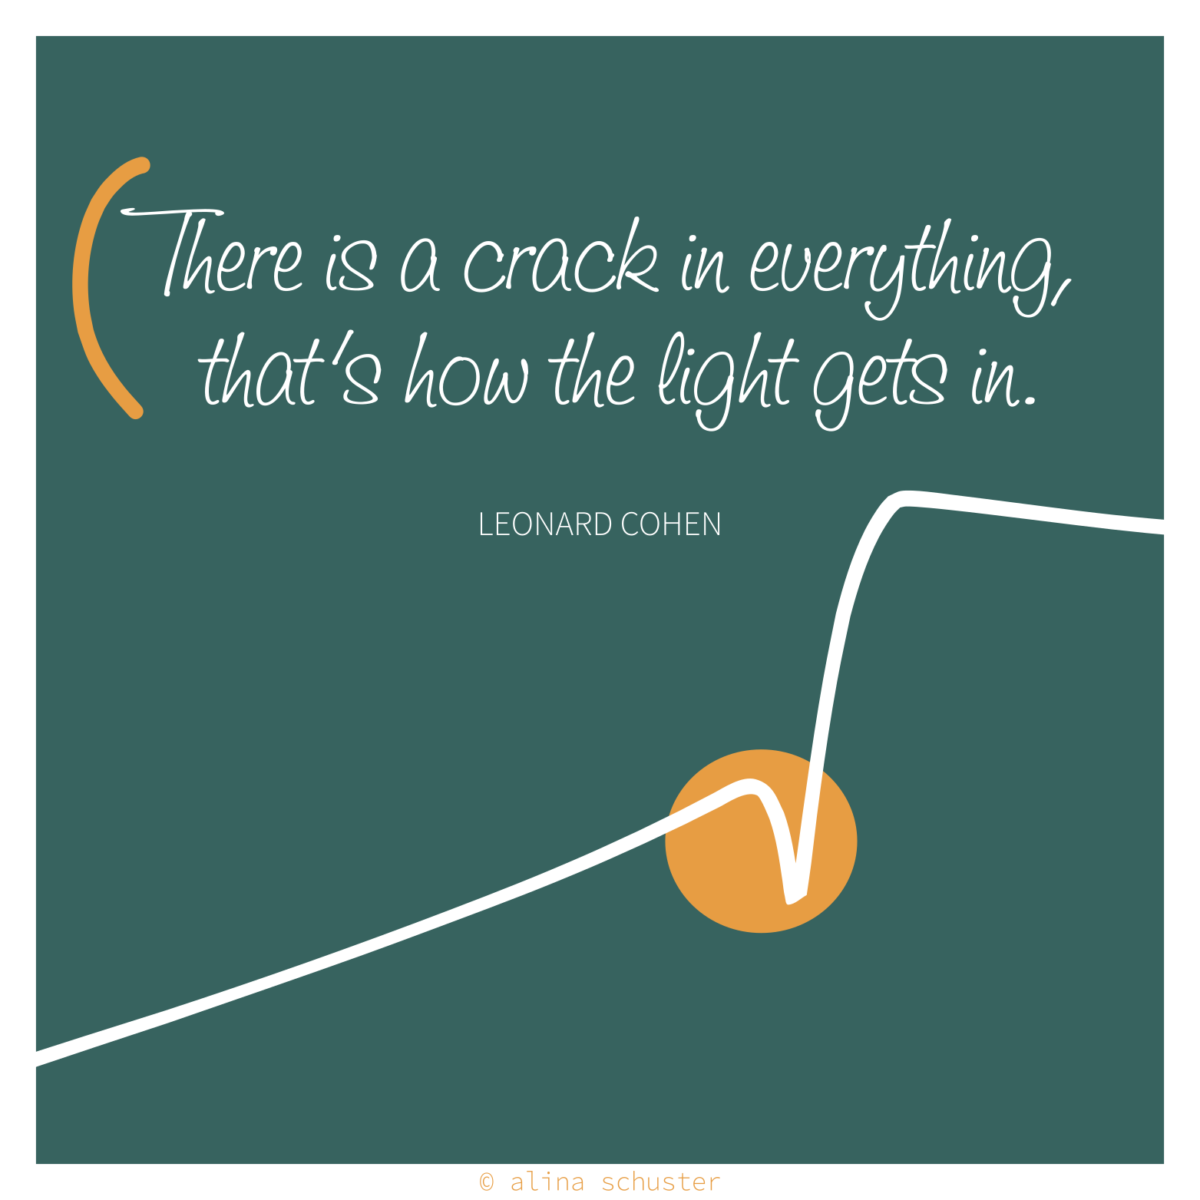 There is a crack in everything. That's how the light gets in. Cohen